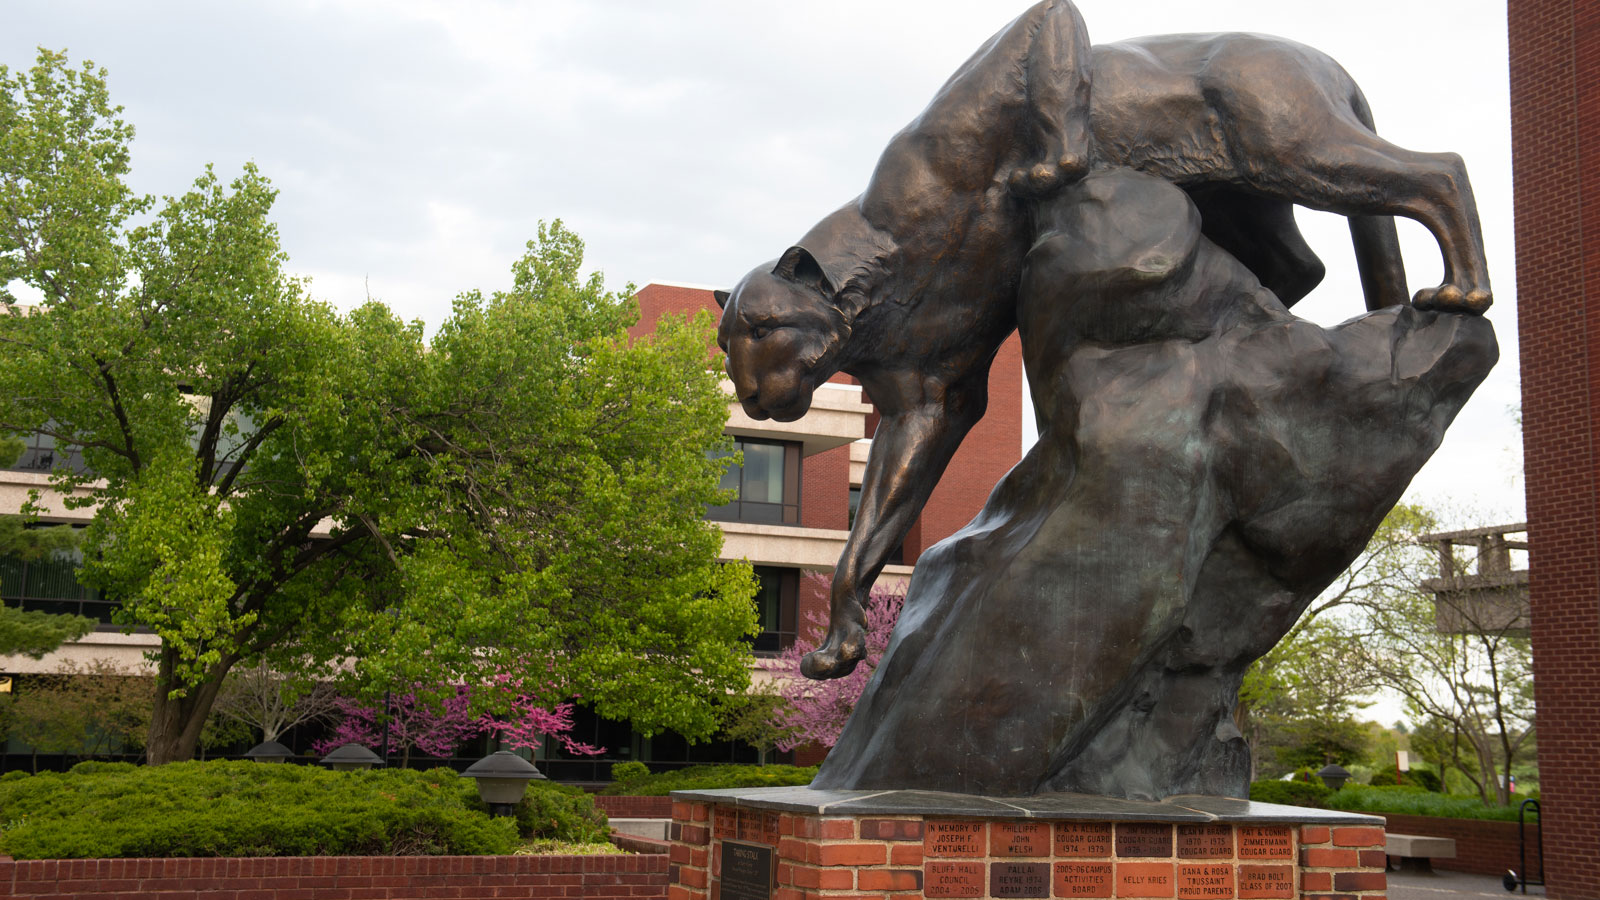 The Cougar Statue